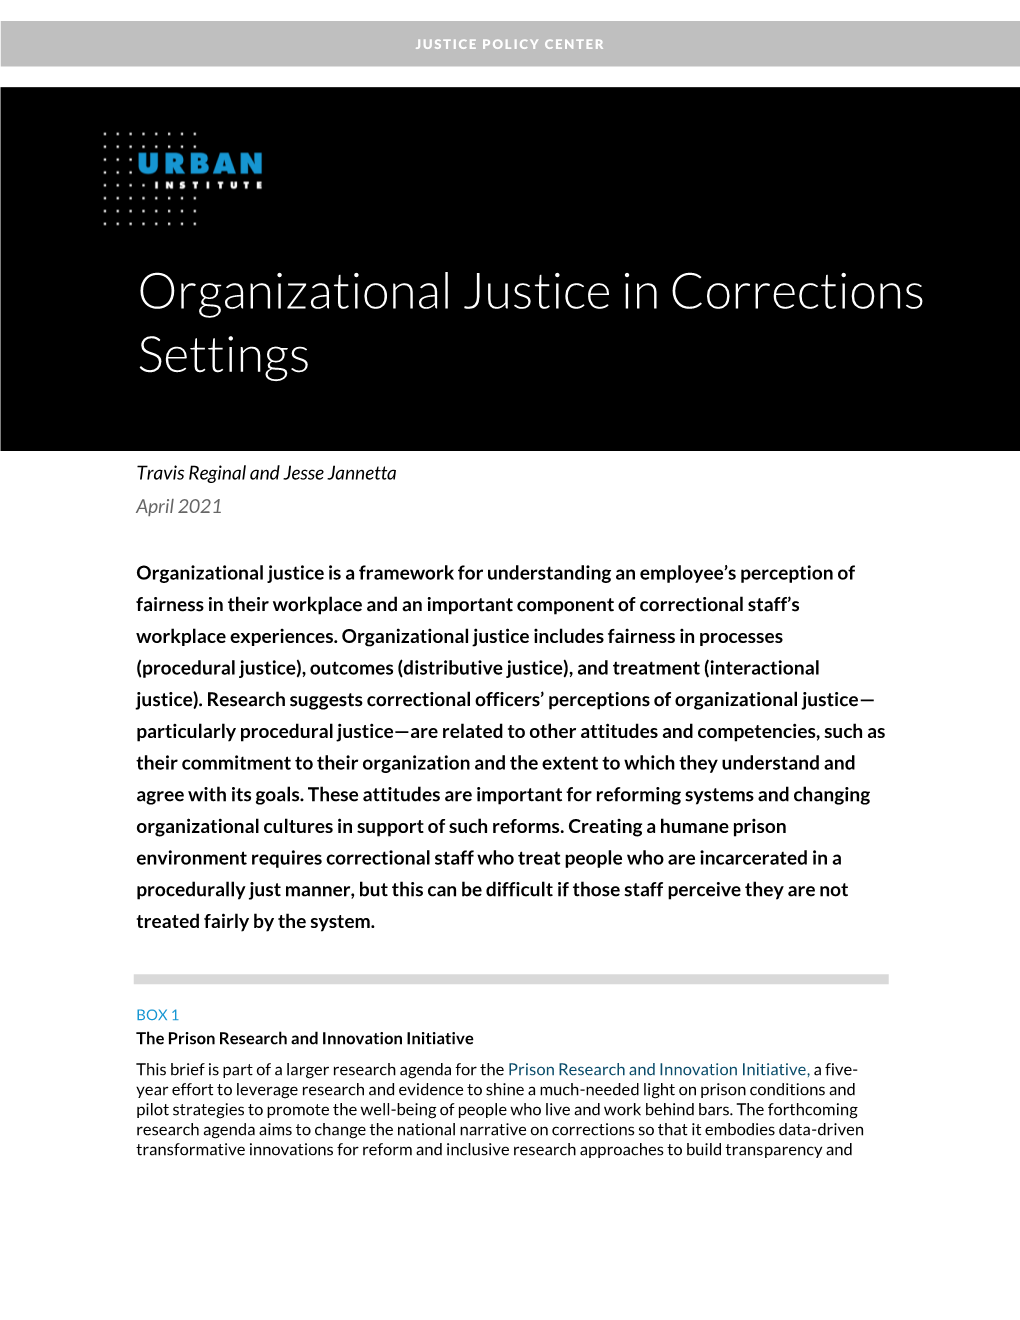 Organizational Justice in Corrections Settings